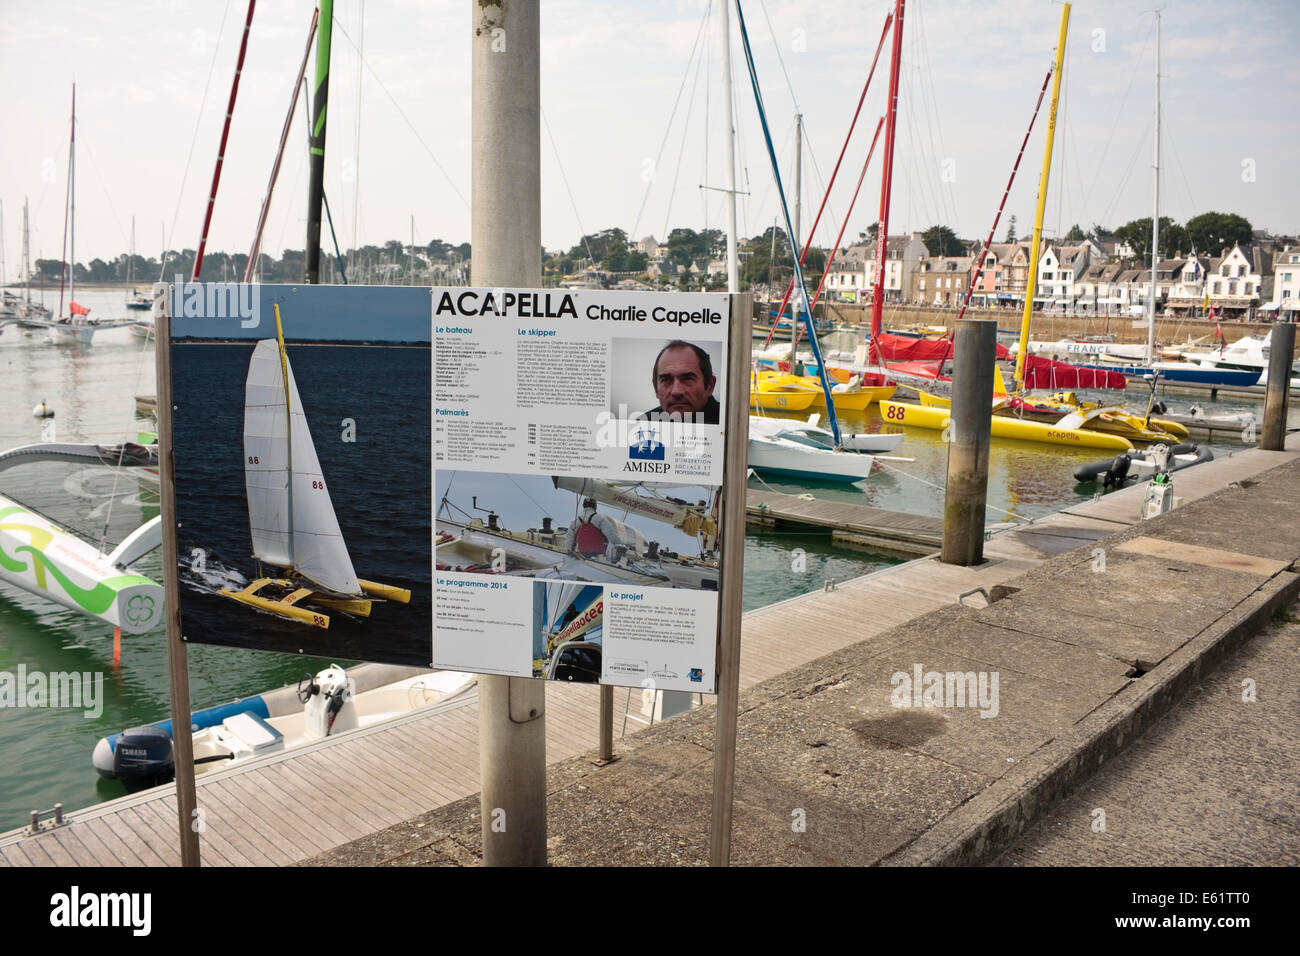 Information board about French skipper Charlie Capelle of the multihull racing boat 'Acapella', La Trinité-sur-Mer, France Stock Photo